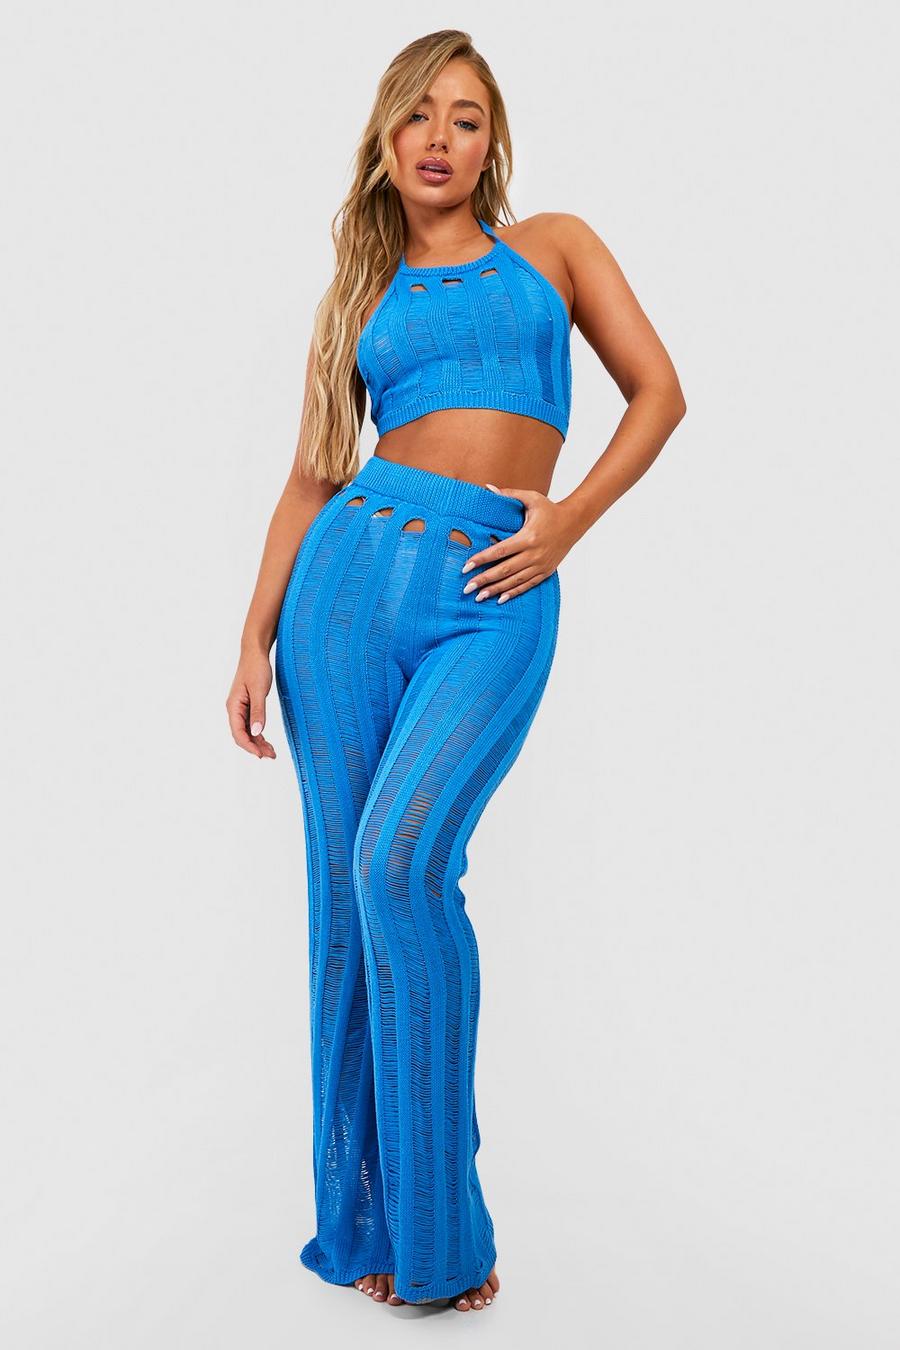 Turquoise Ladder Crochet Top & Pants Beach Co-Ord